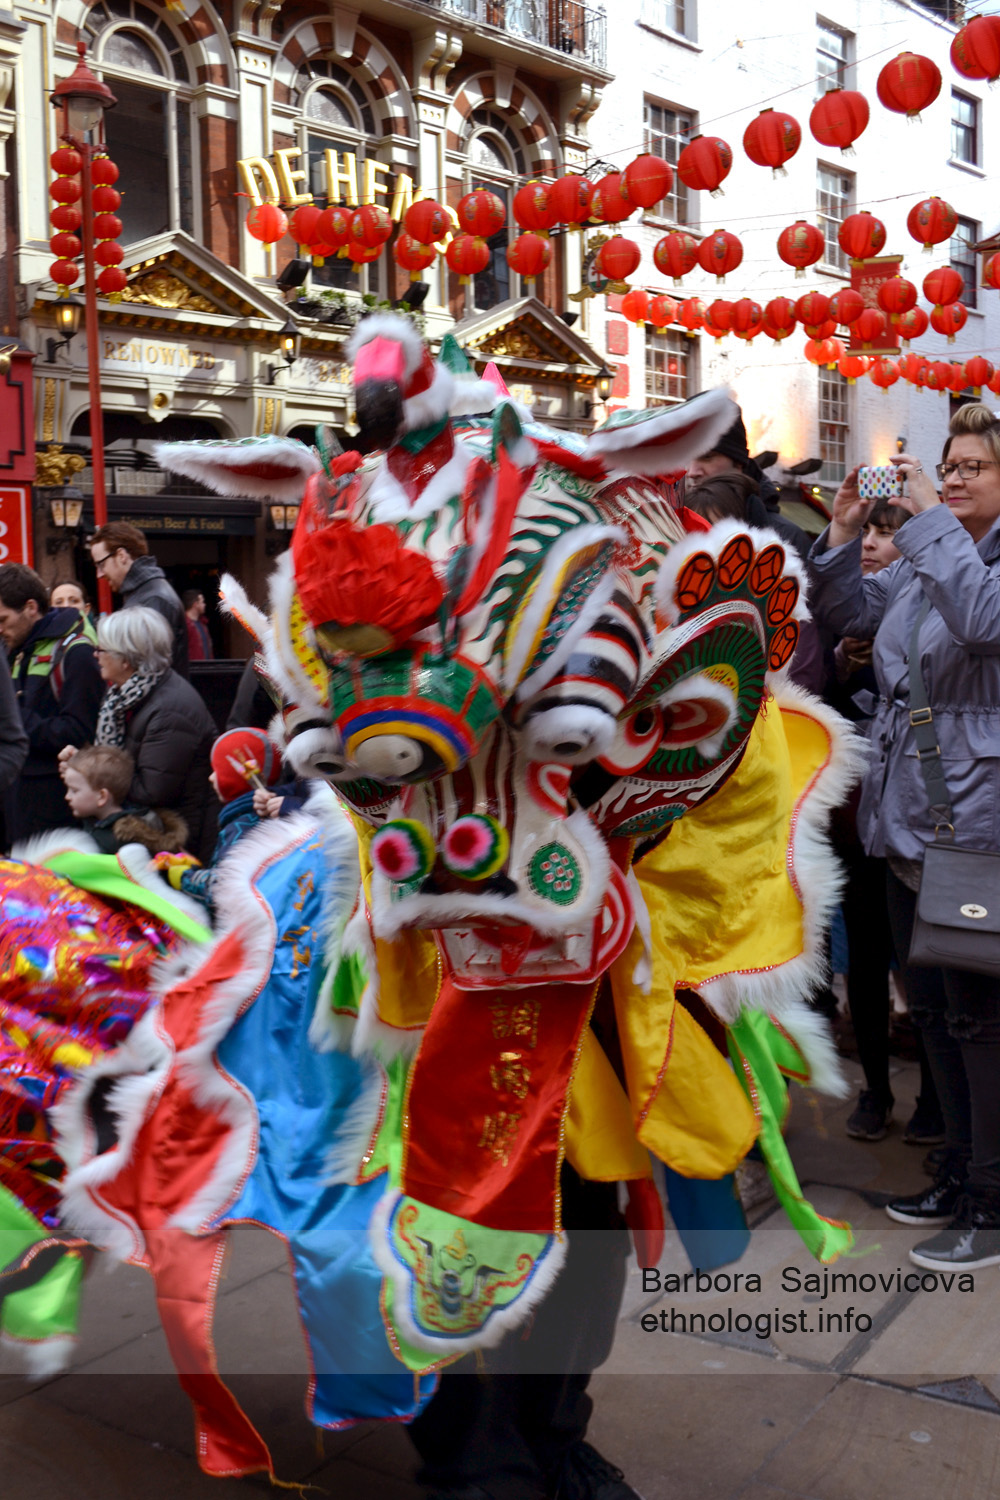 Traditional celebration of Chinese New Year in Chinatown in London.